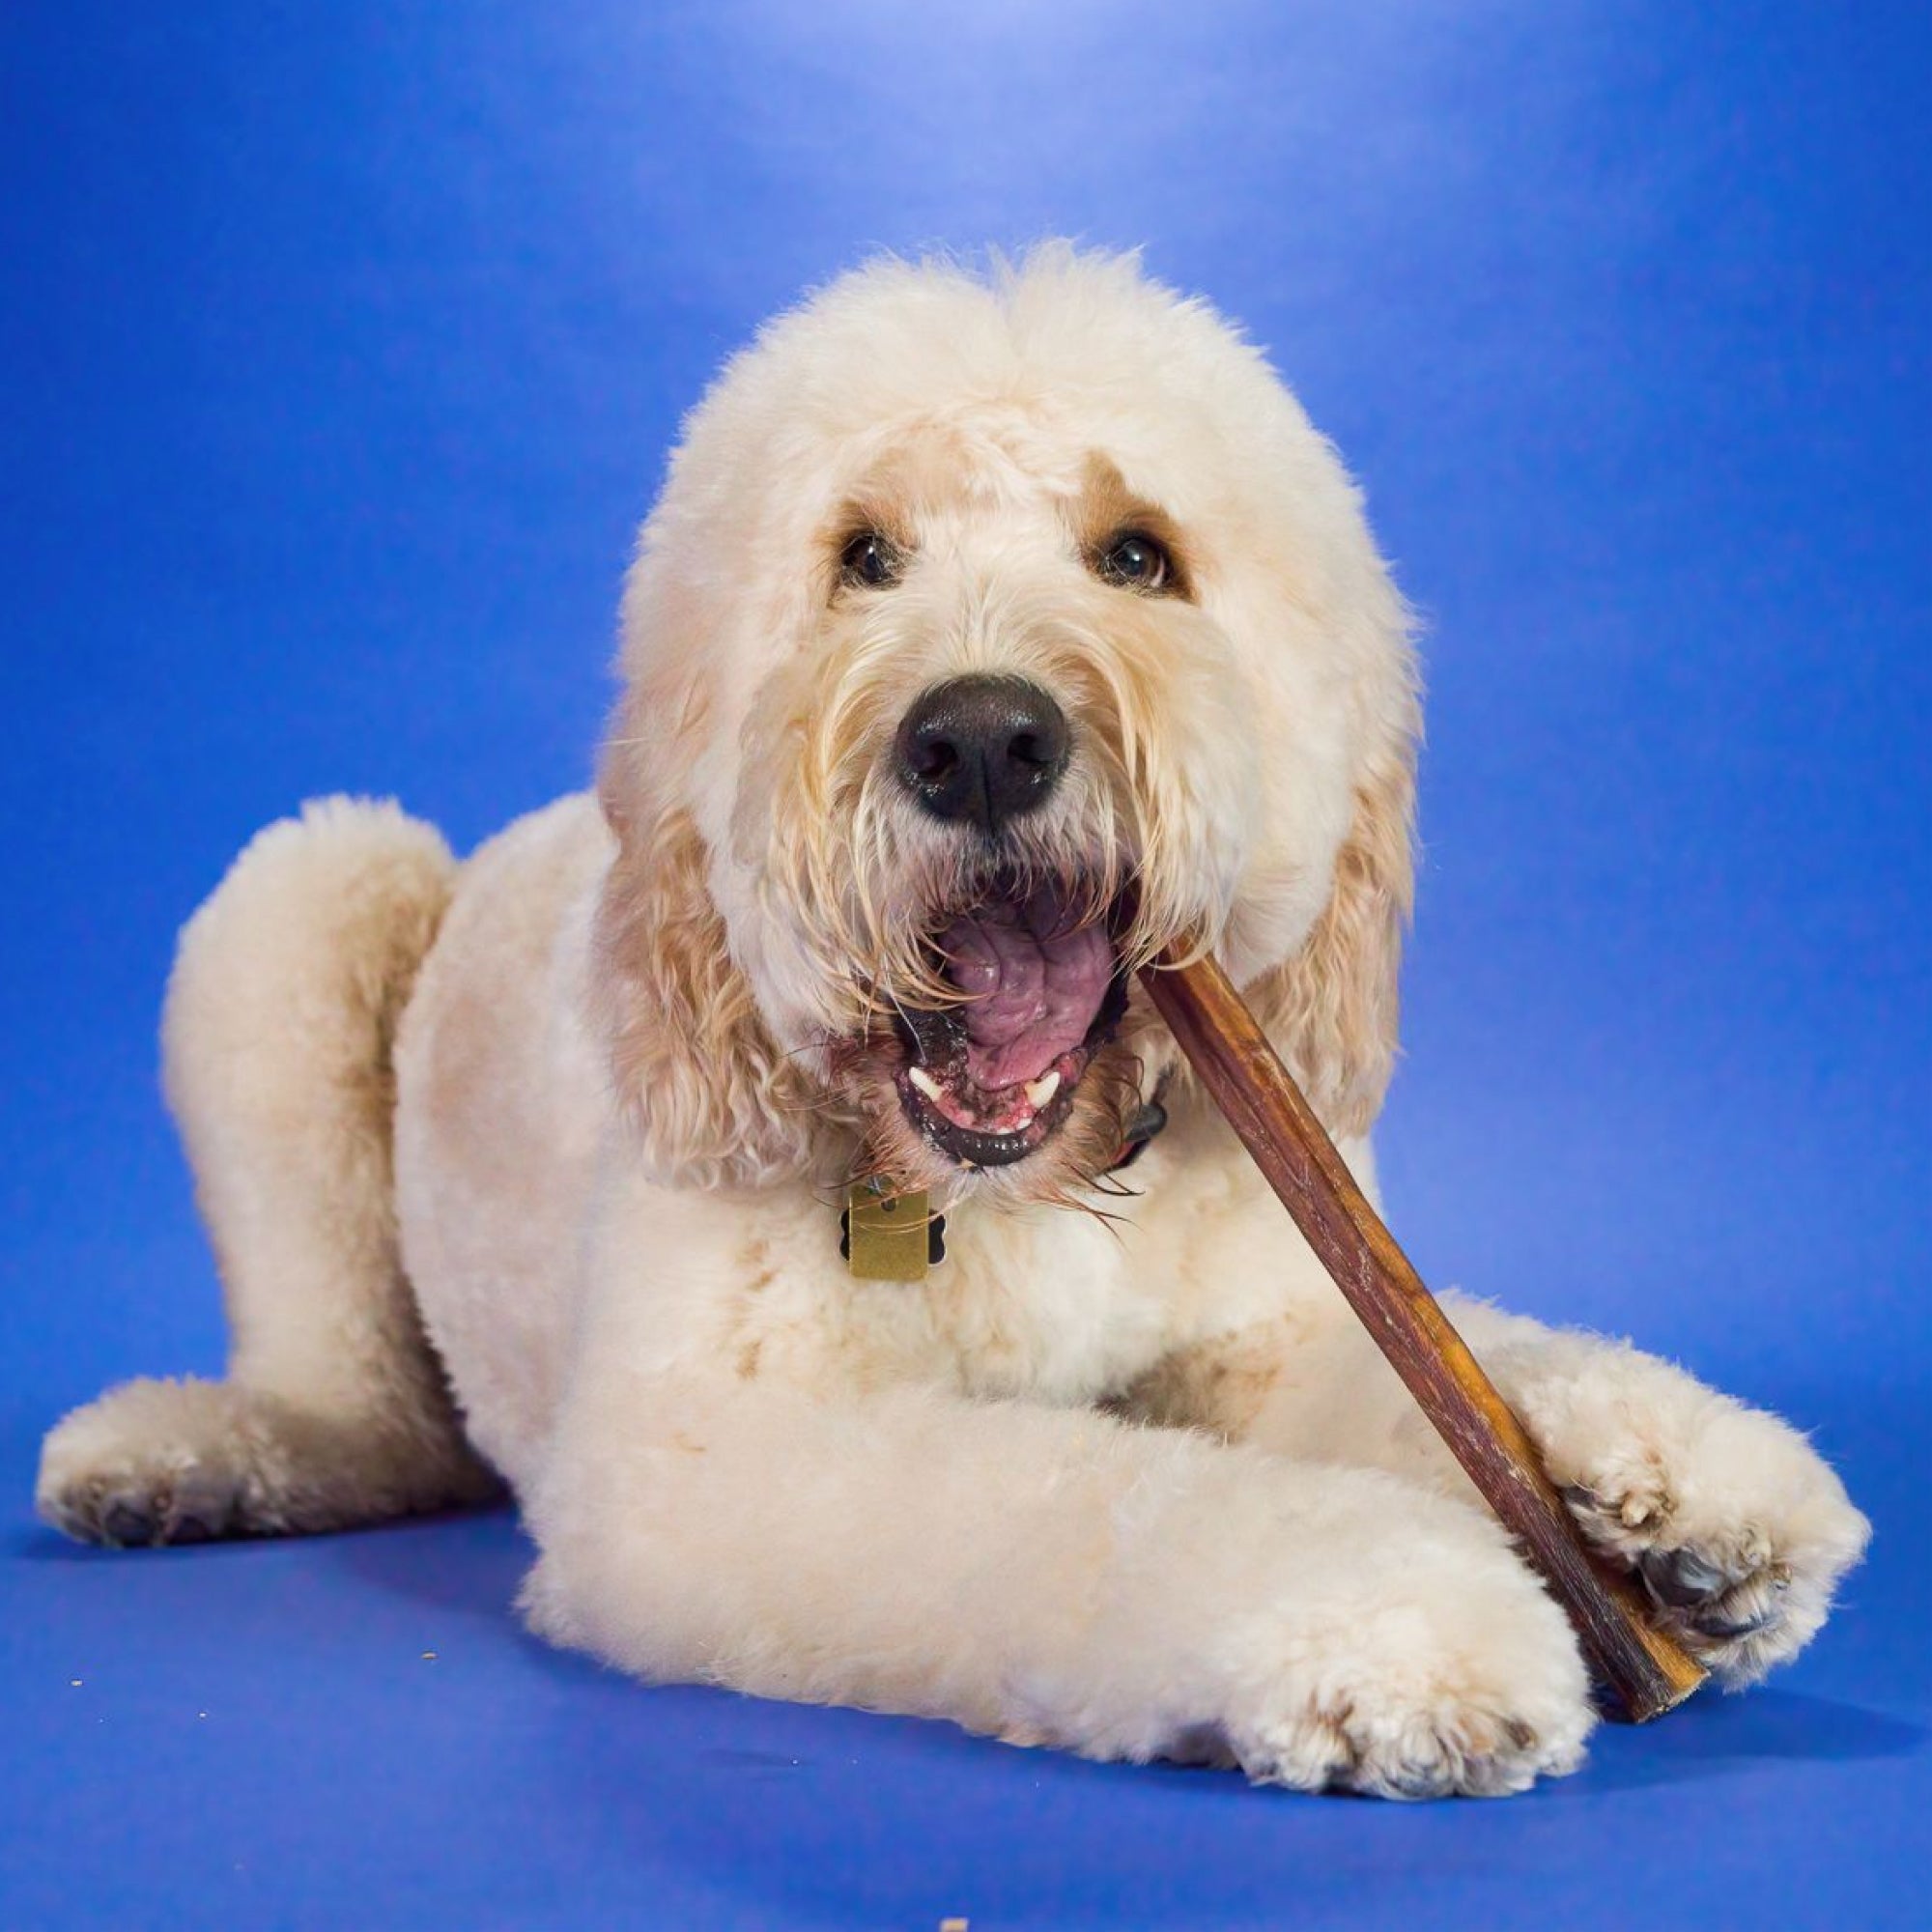 A dog is sitting on a blue background with a 12-Inch Jumbo Bully Stick from Best Bully Sticks in its mouth.